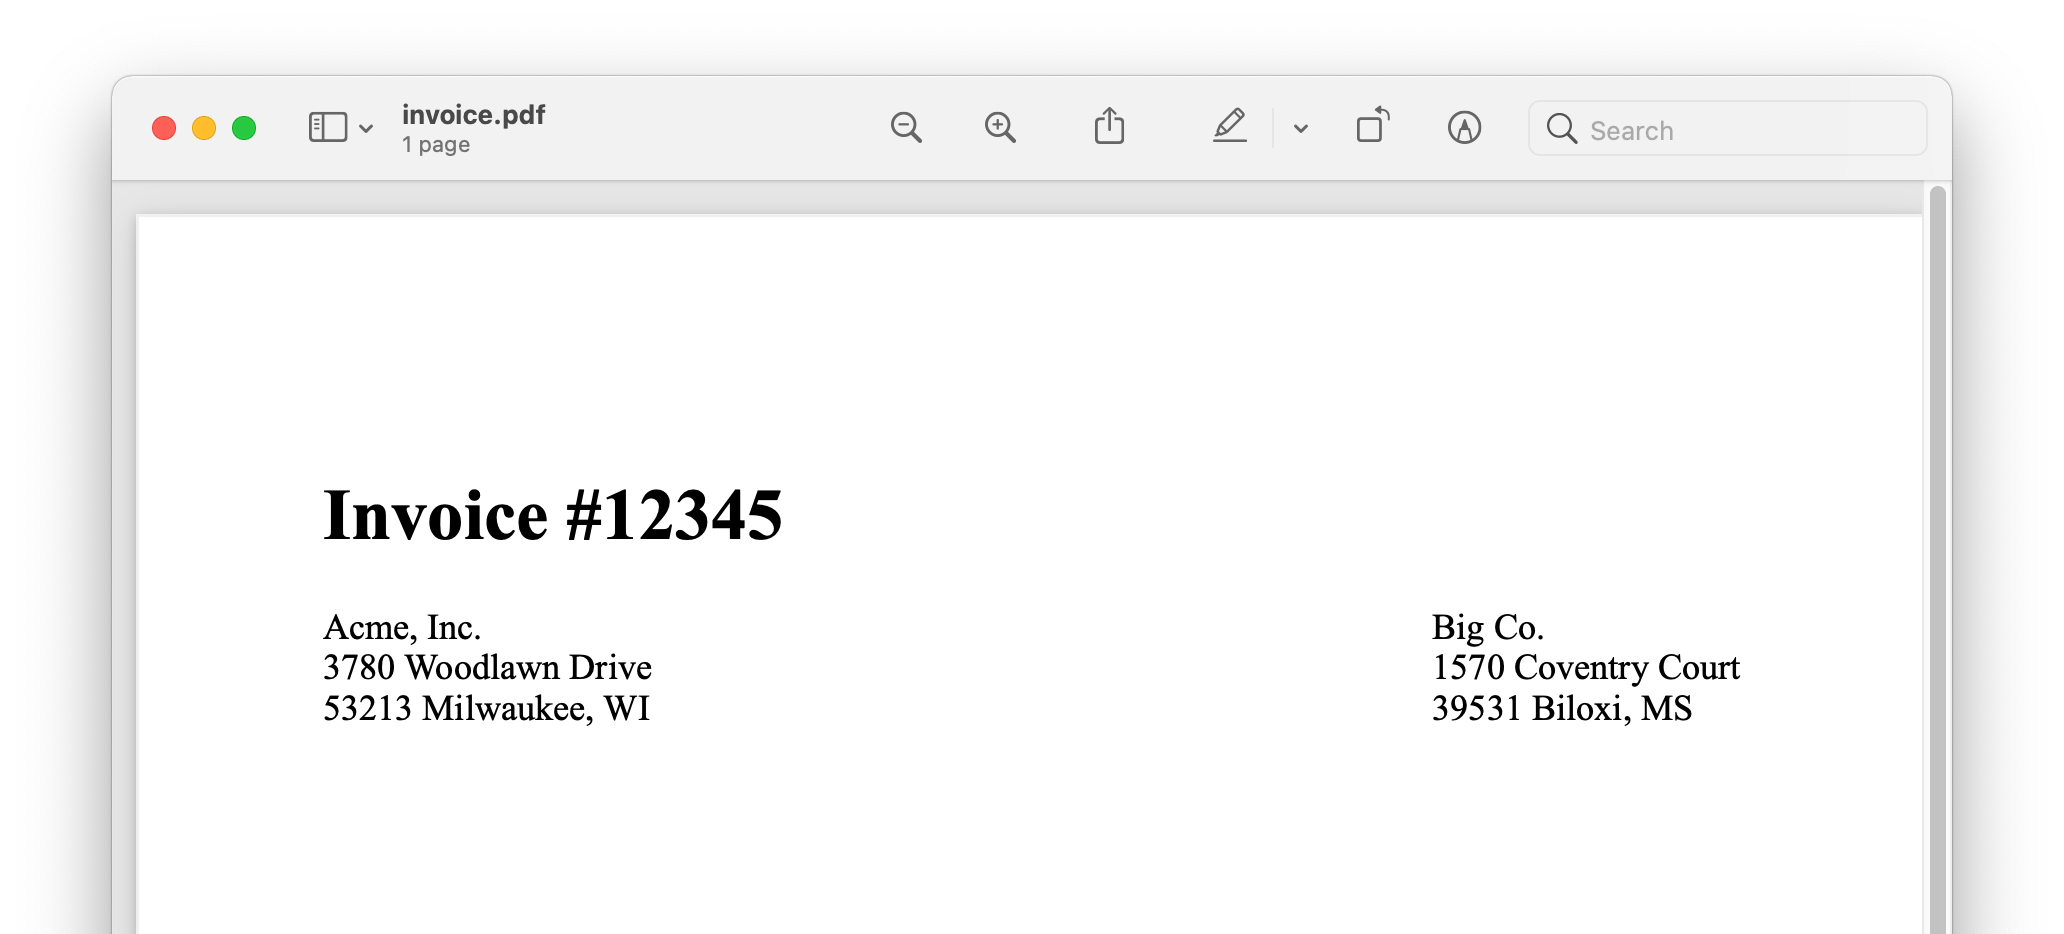 PDF Invoice generated from HTML with margins